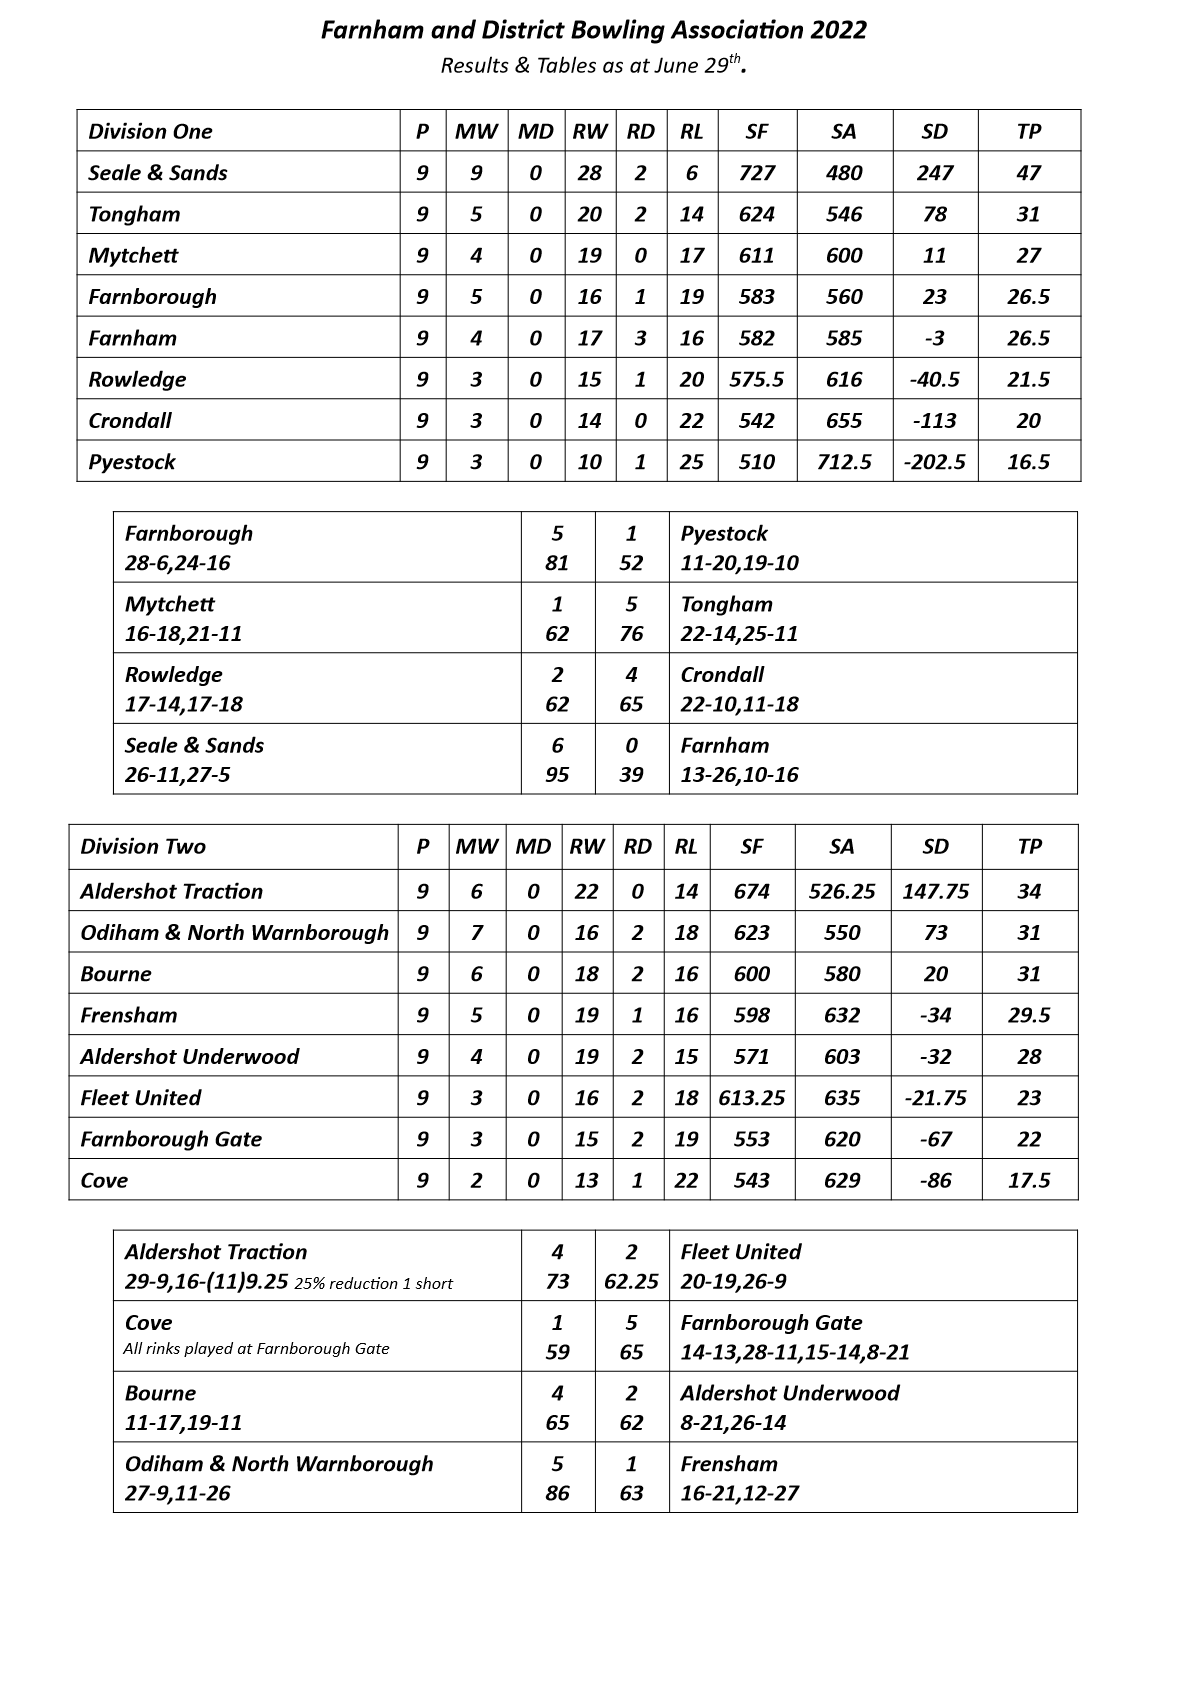  Farnham&District Bowling Association  Tables & Results as at June 29th